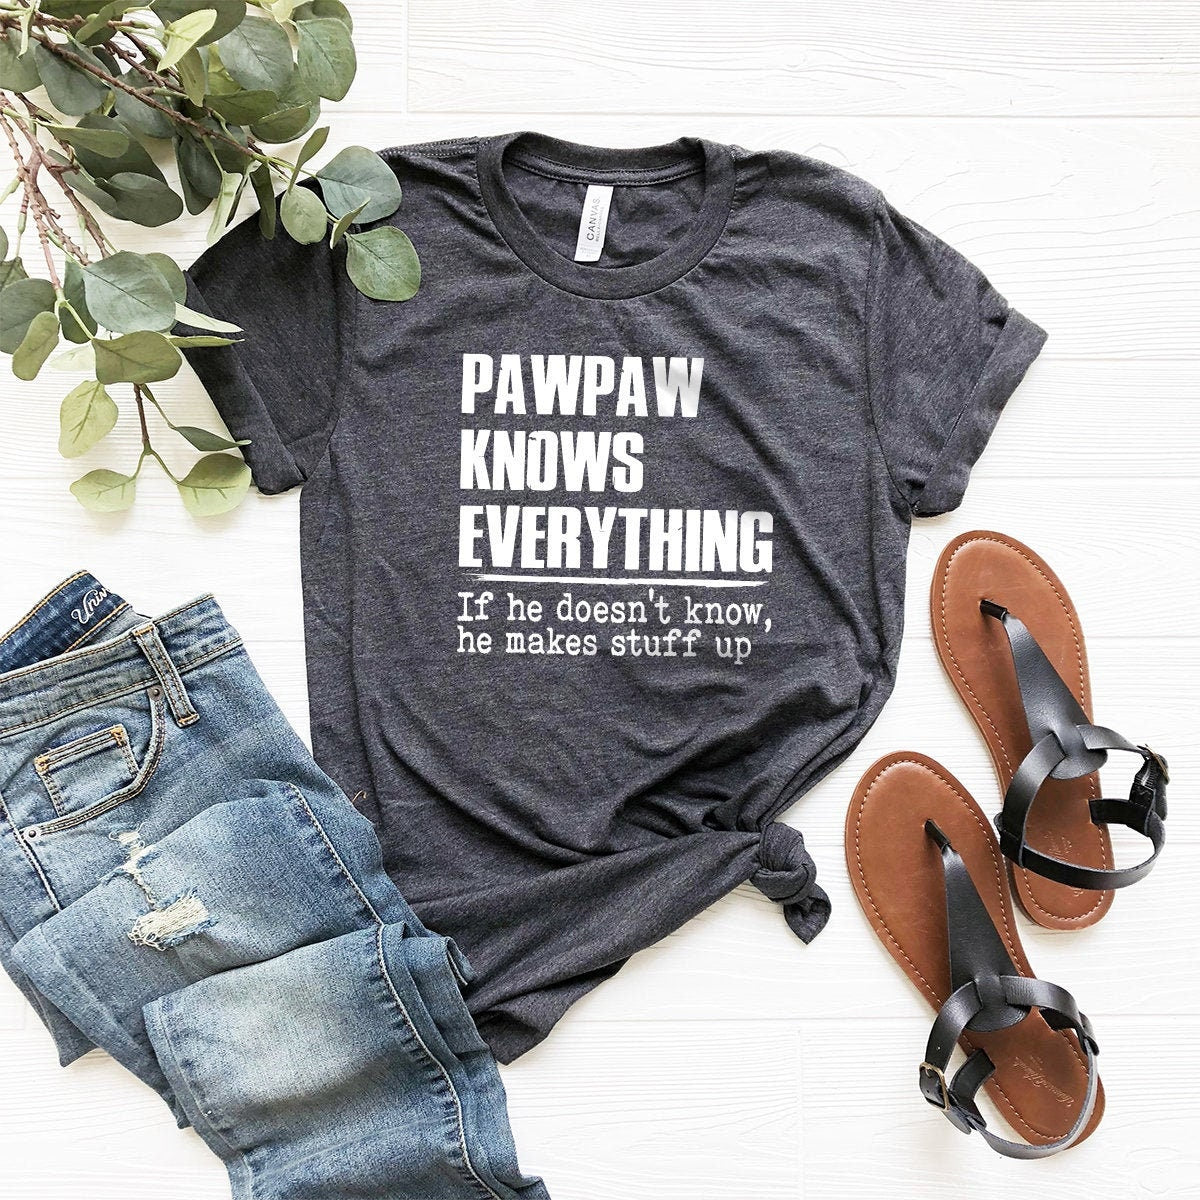 Funny Grandpa Shirt, Pawpaw T Shirt, Papaw Gift, Papa T Shirt, Grandfather Gifts, Grandpa T Shirt, Grandpa Gift, Papaw Knows Everything Tee - Fastdeliverytees.com